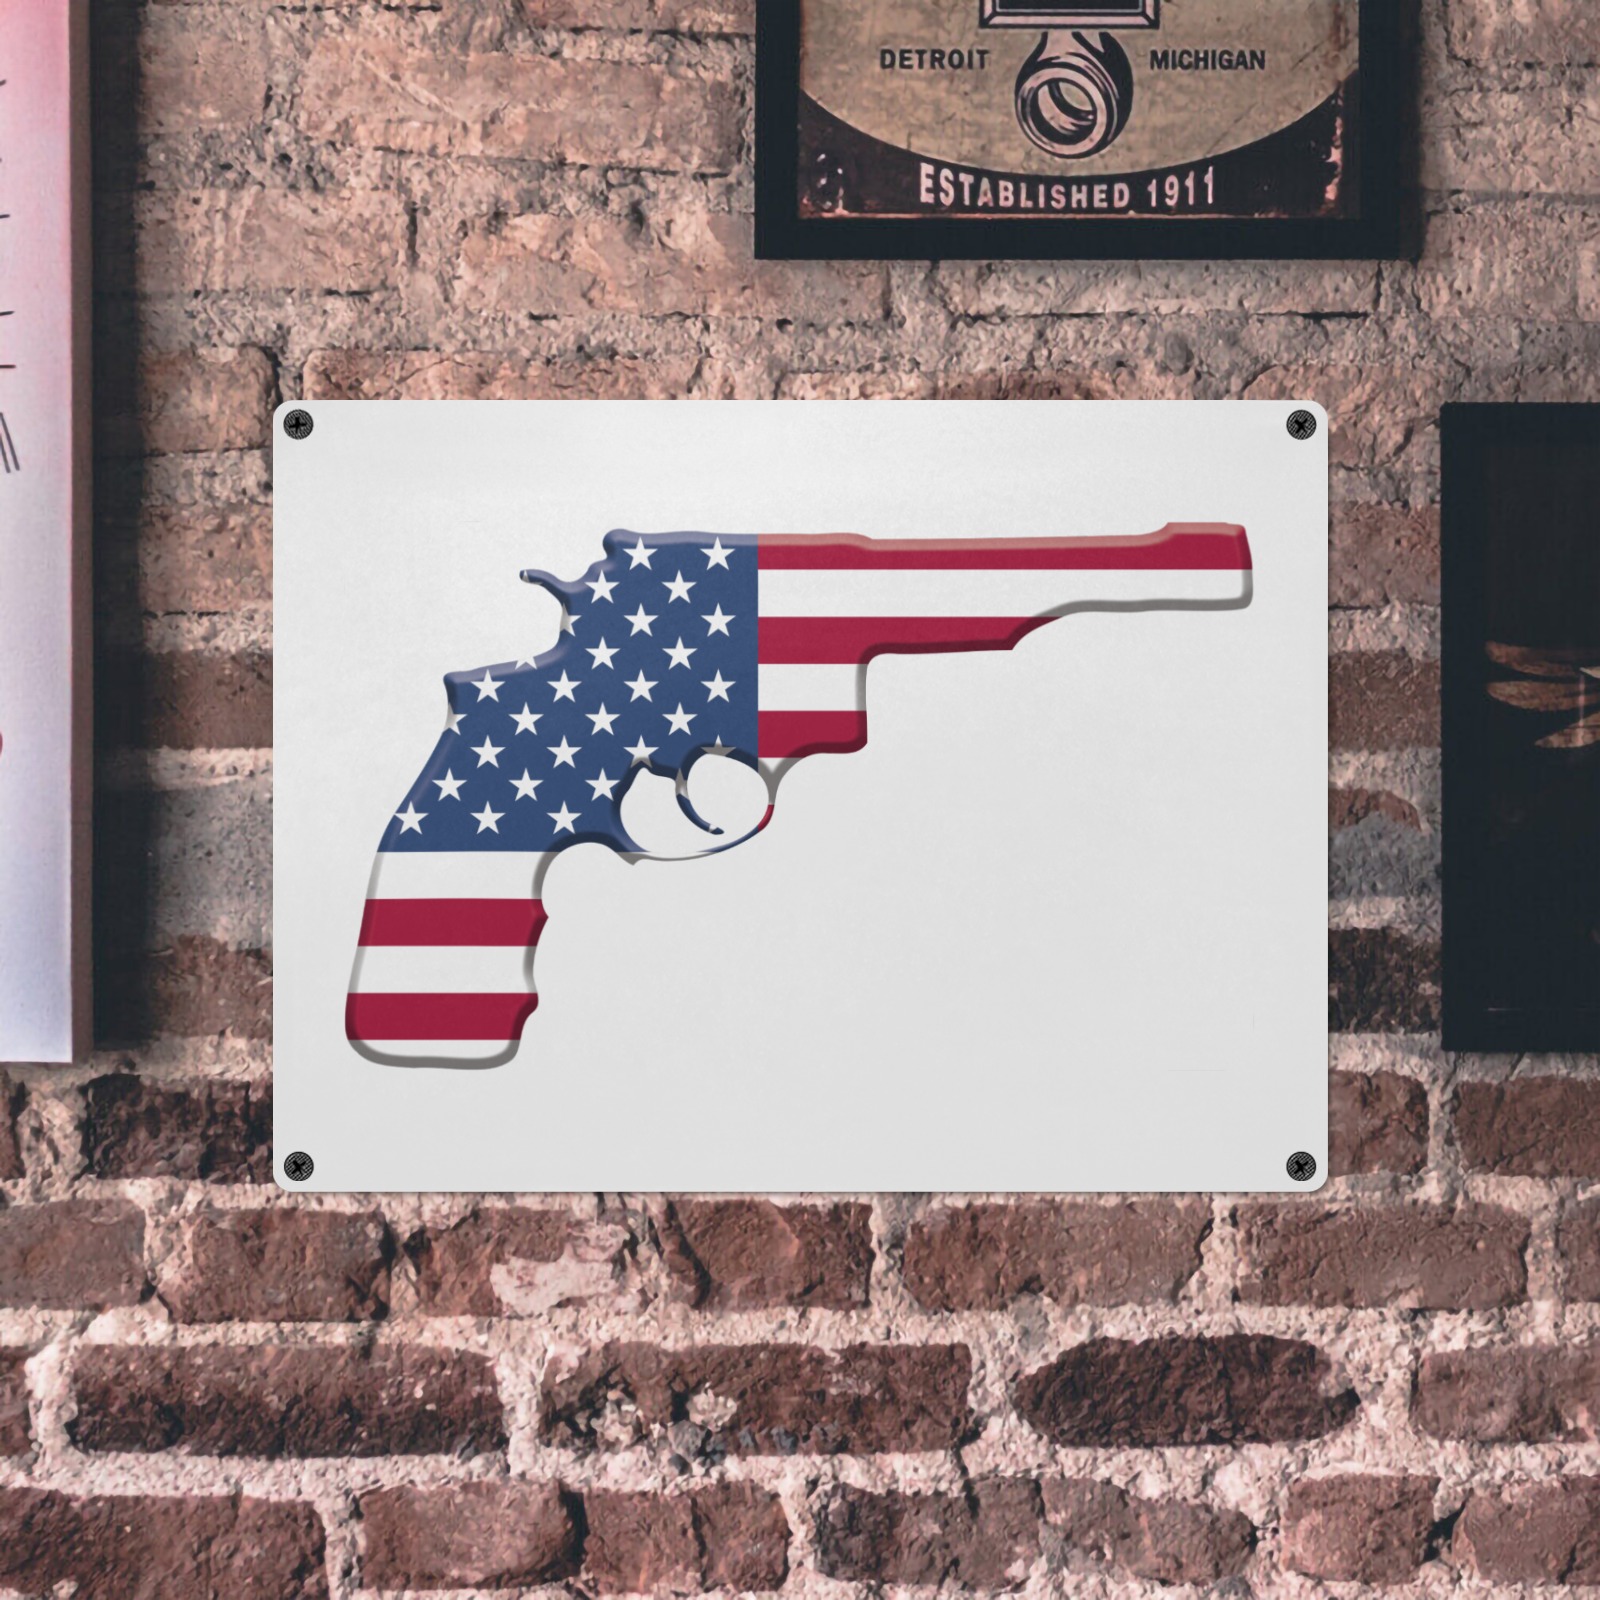 Revolver decorated with the American flag art. Metal Tin Sign 16"x12"